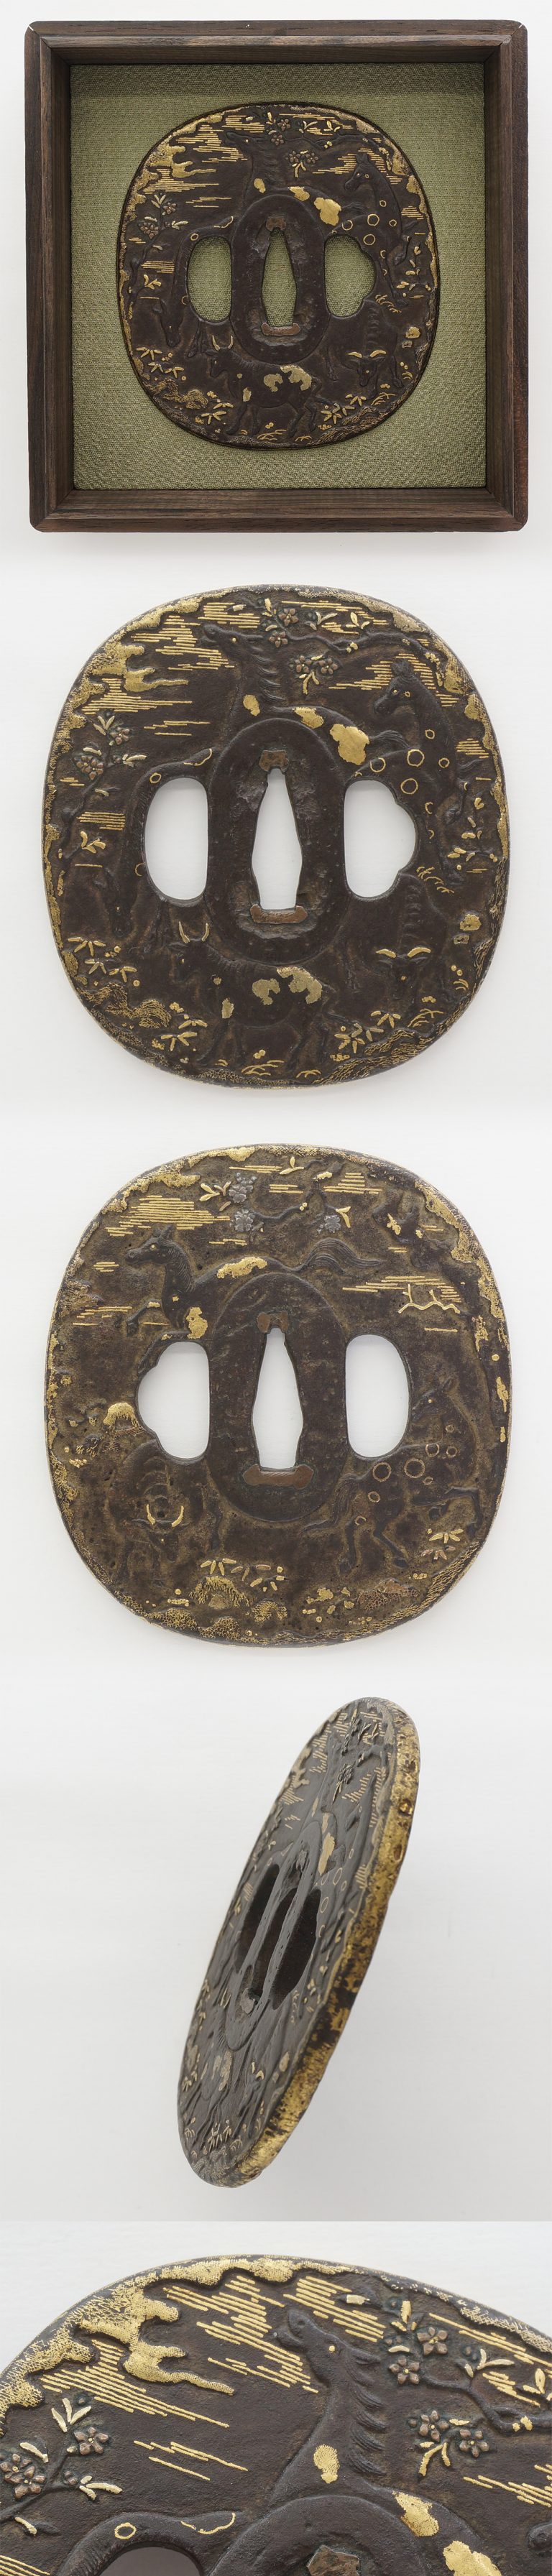 Tsuba: Mumei(Unsigned) Design of Cow and Horse